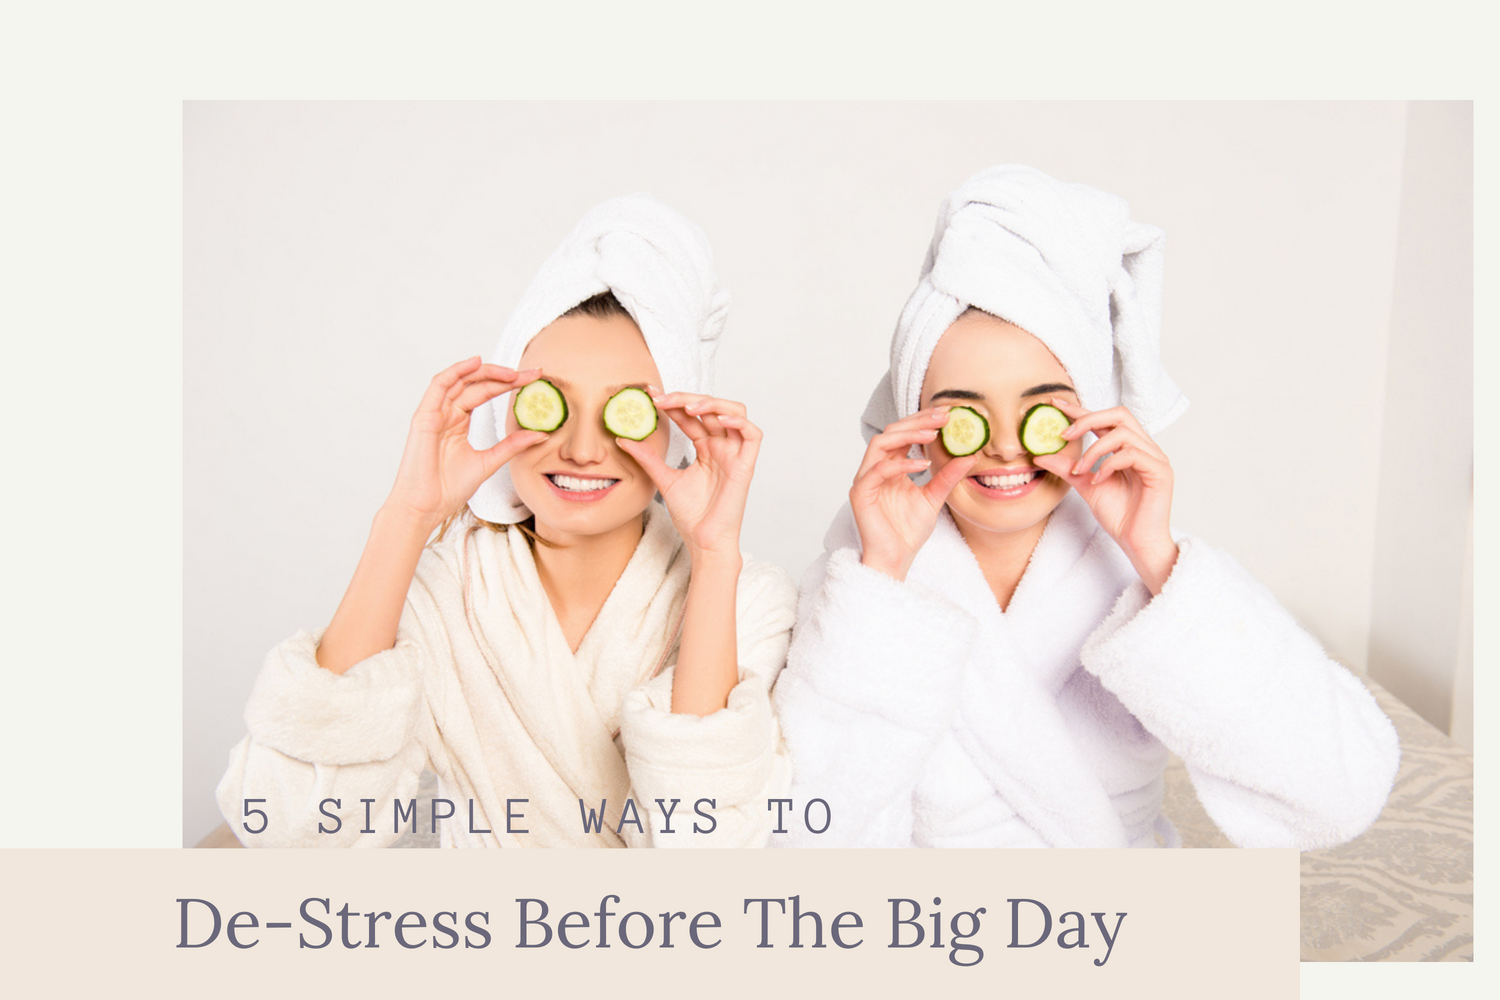 5 Ways to De-Stress Before The Big Day